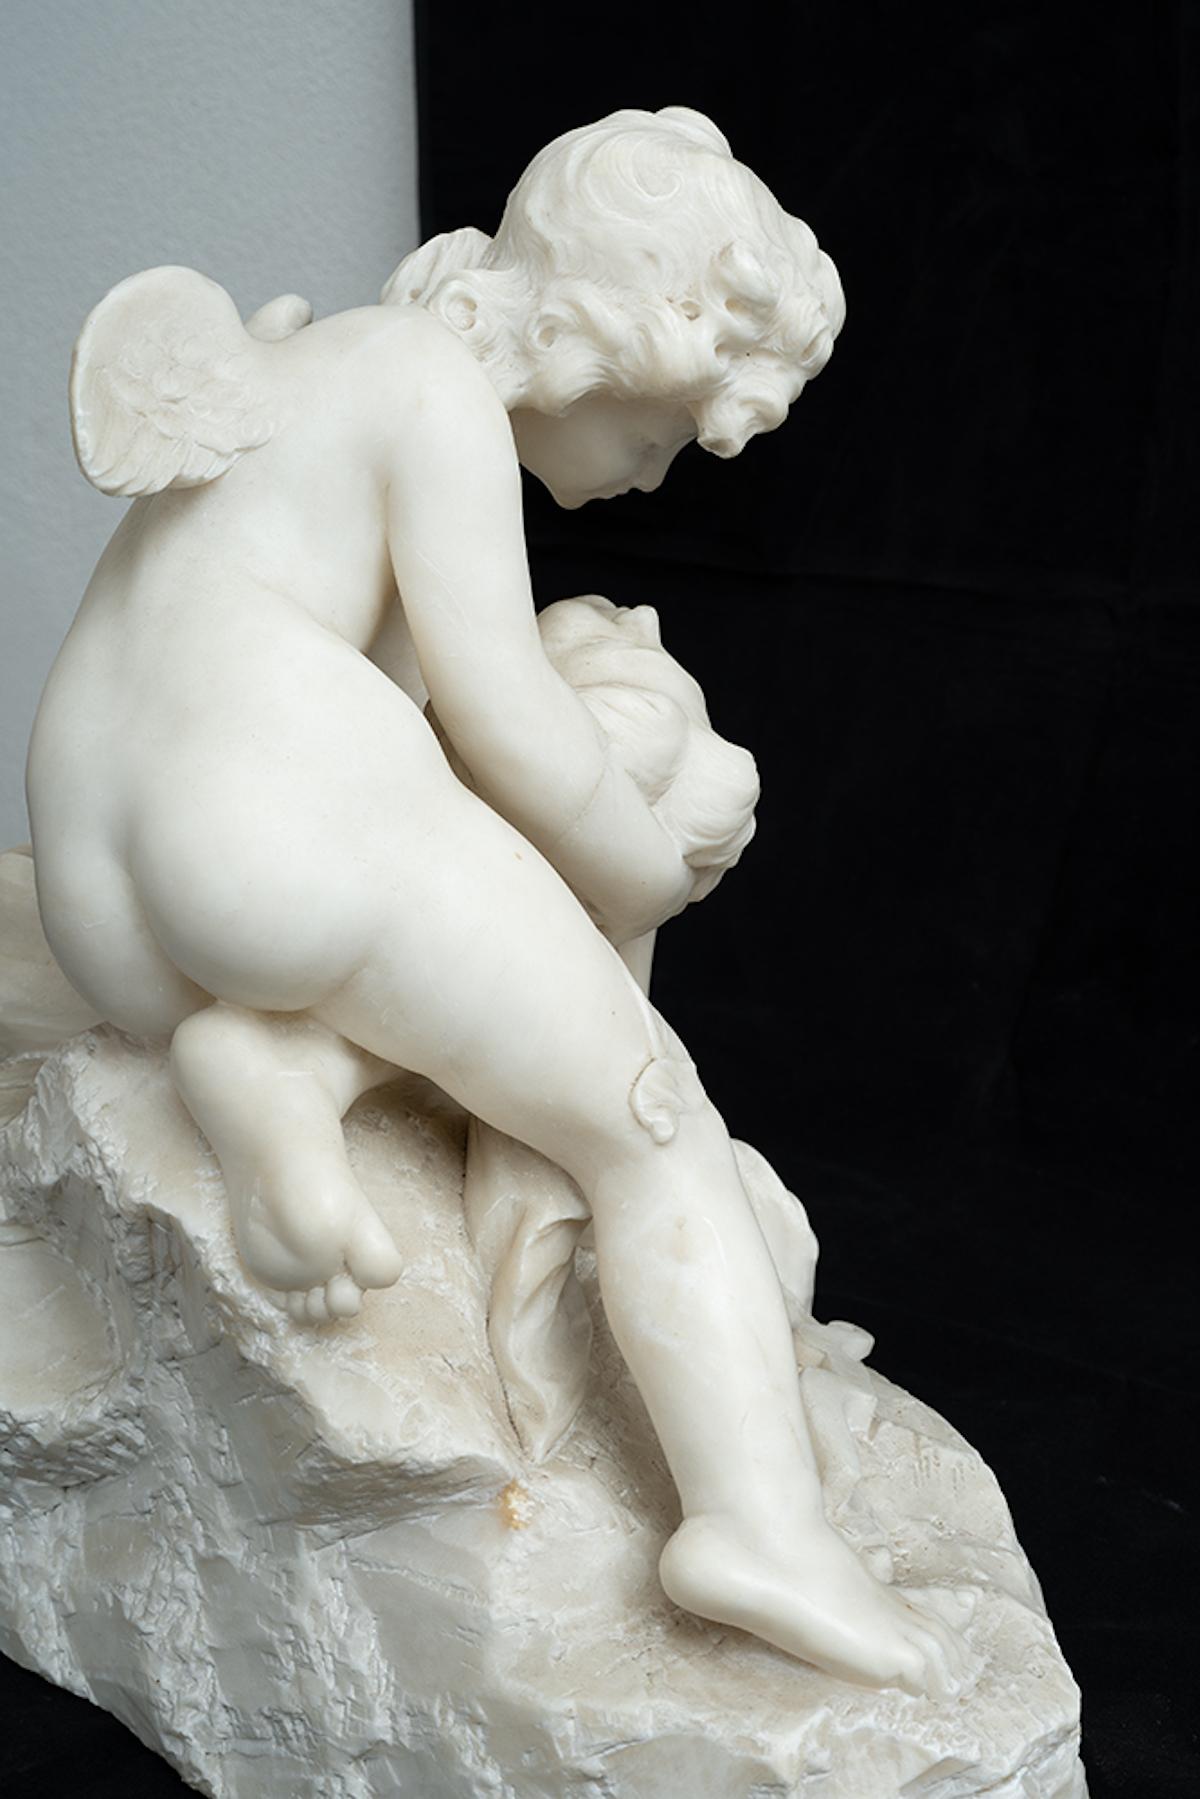 Antique French Napoleon III alabaster sculpture depicting Cupid and Psyche. - Gray Figurative Sculpture by Unknown